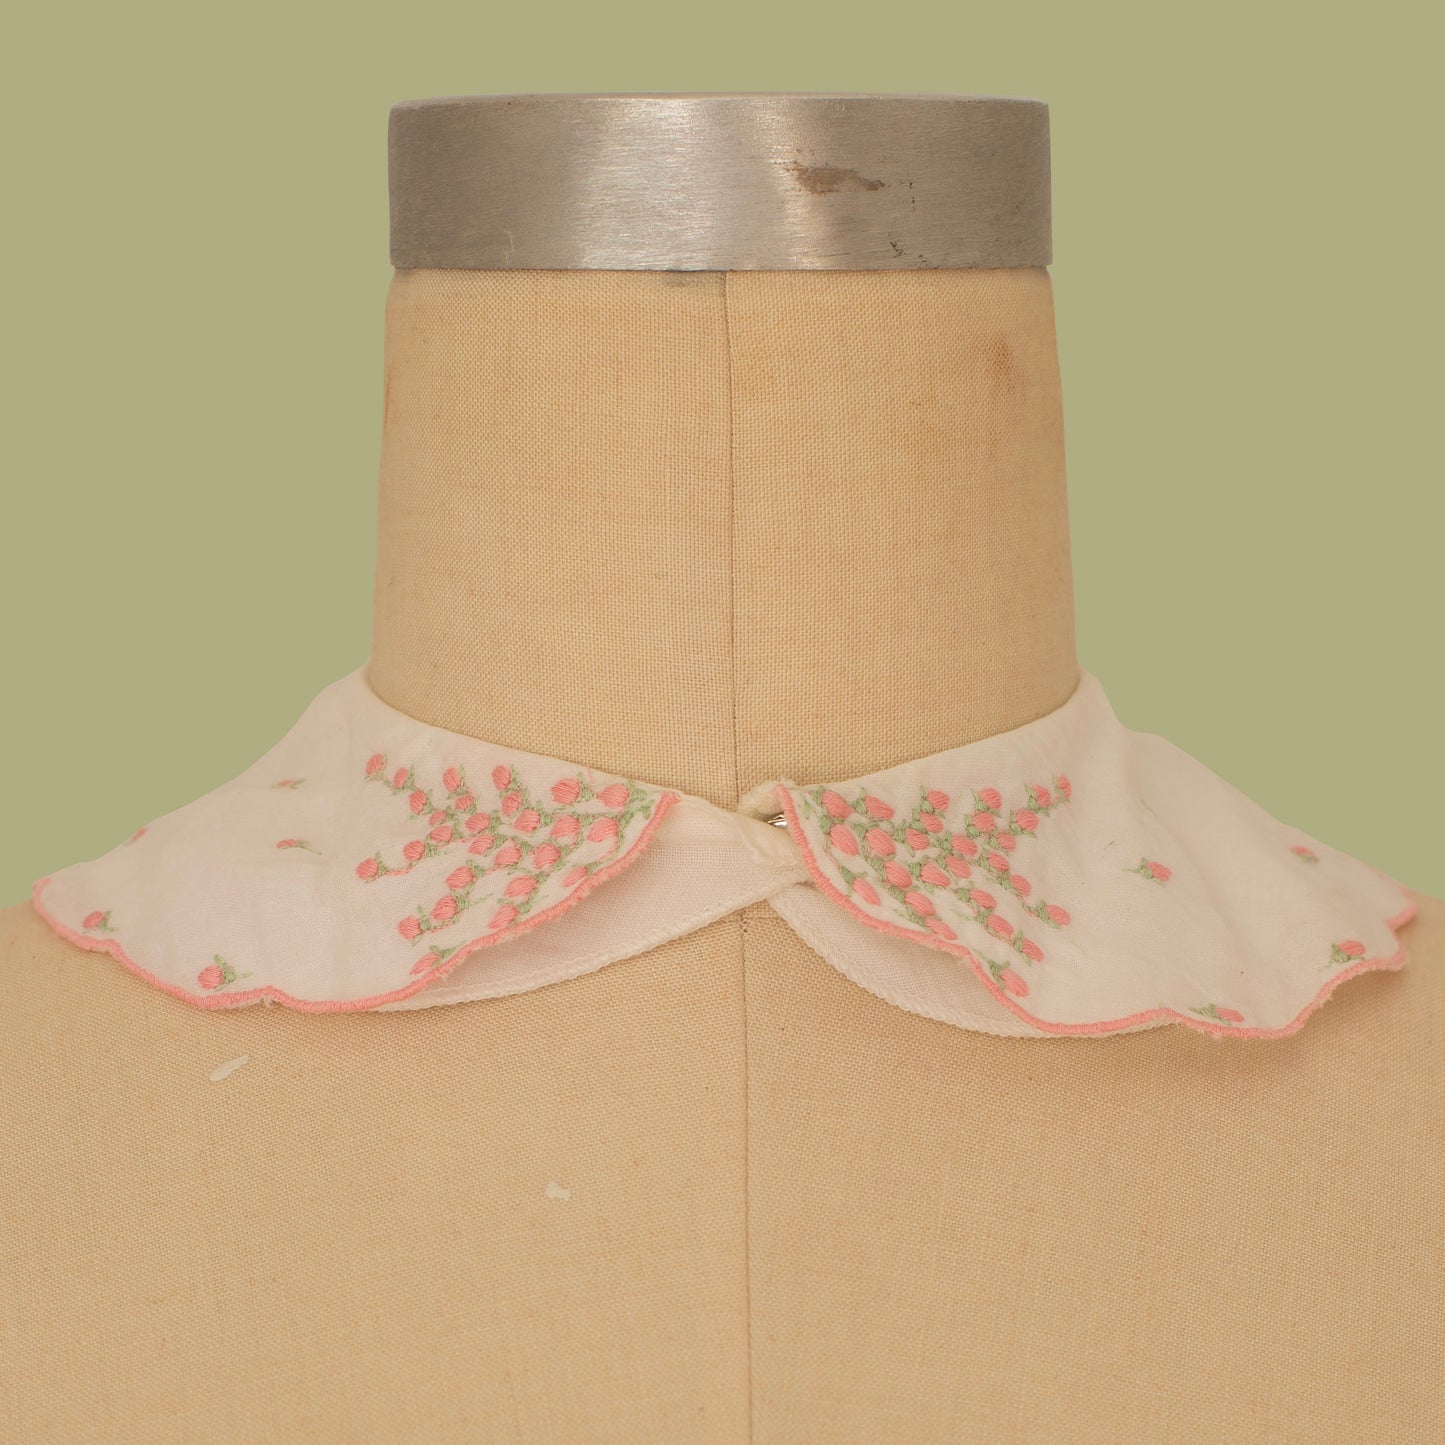 Vintage 1950s Embroidered Rose Bud Cotton Collar Choker